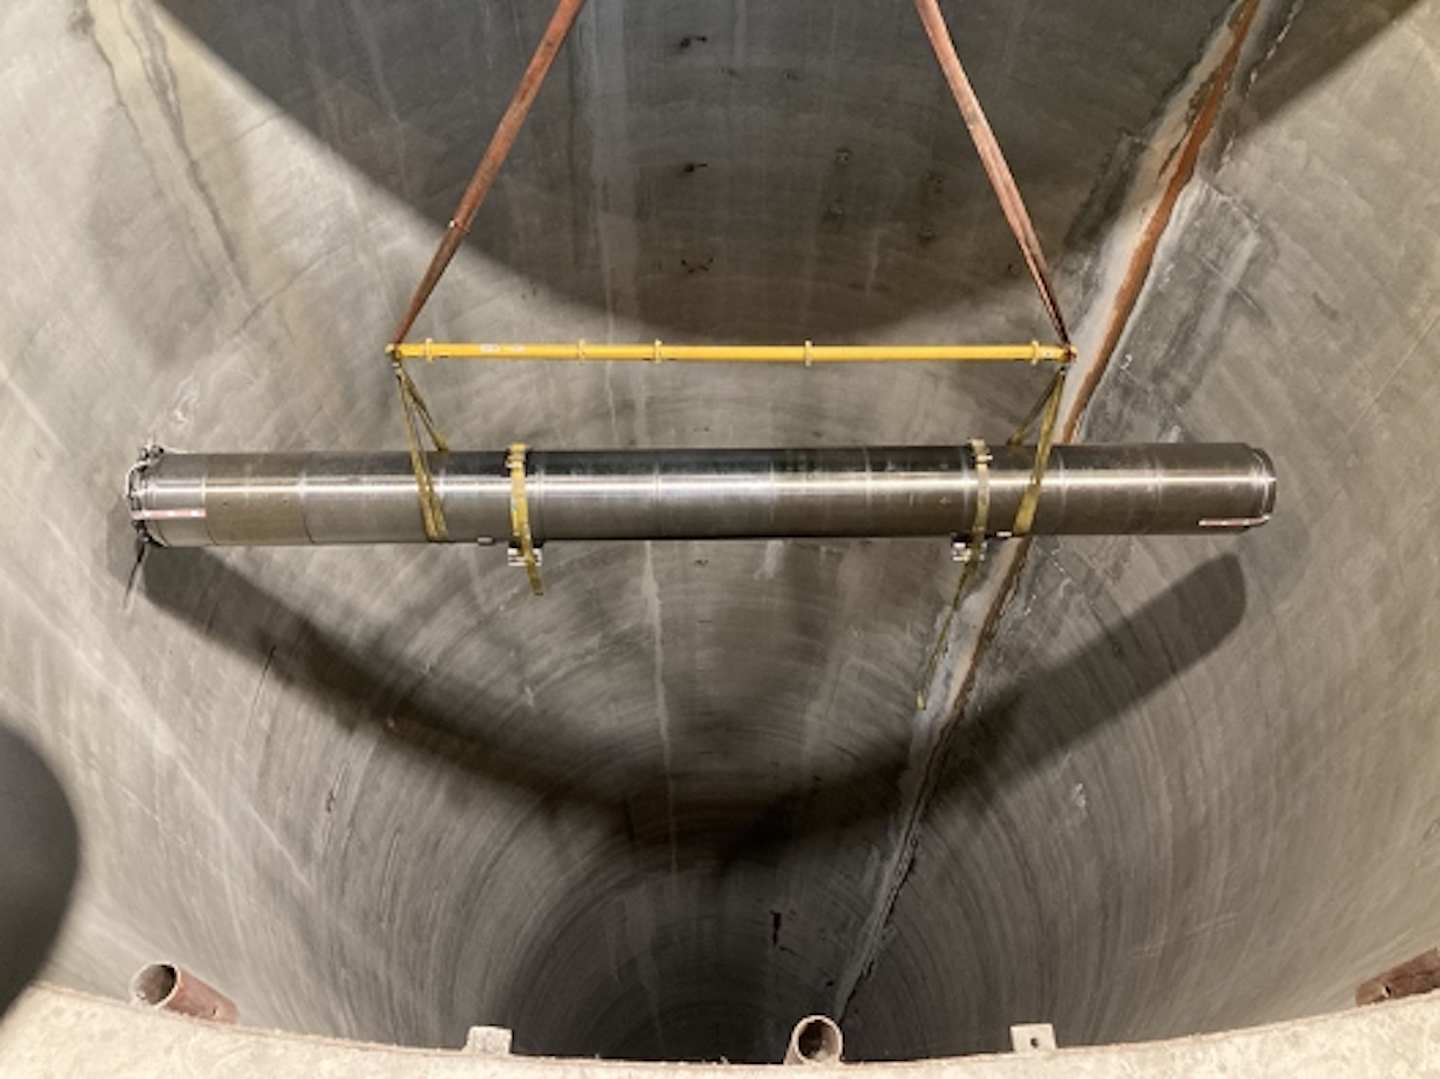 A beam dumps being lowered into the accelerator tunnel 